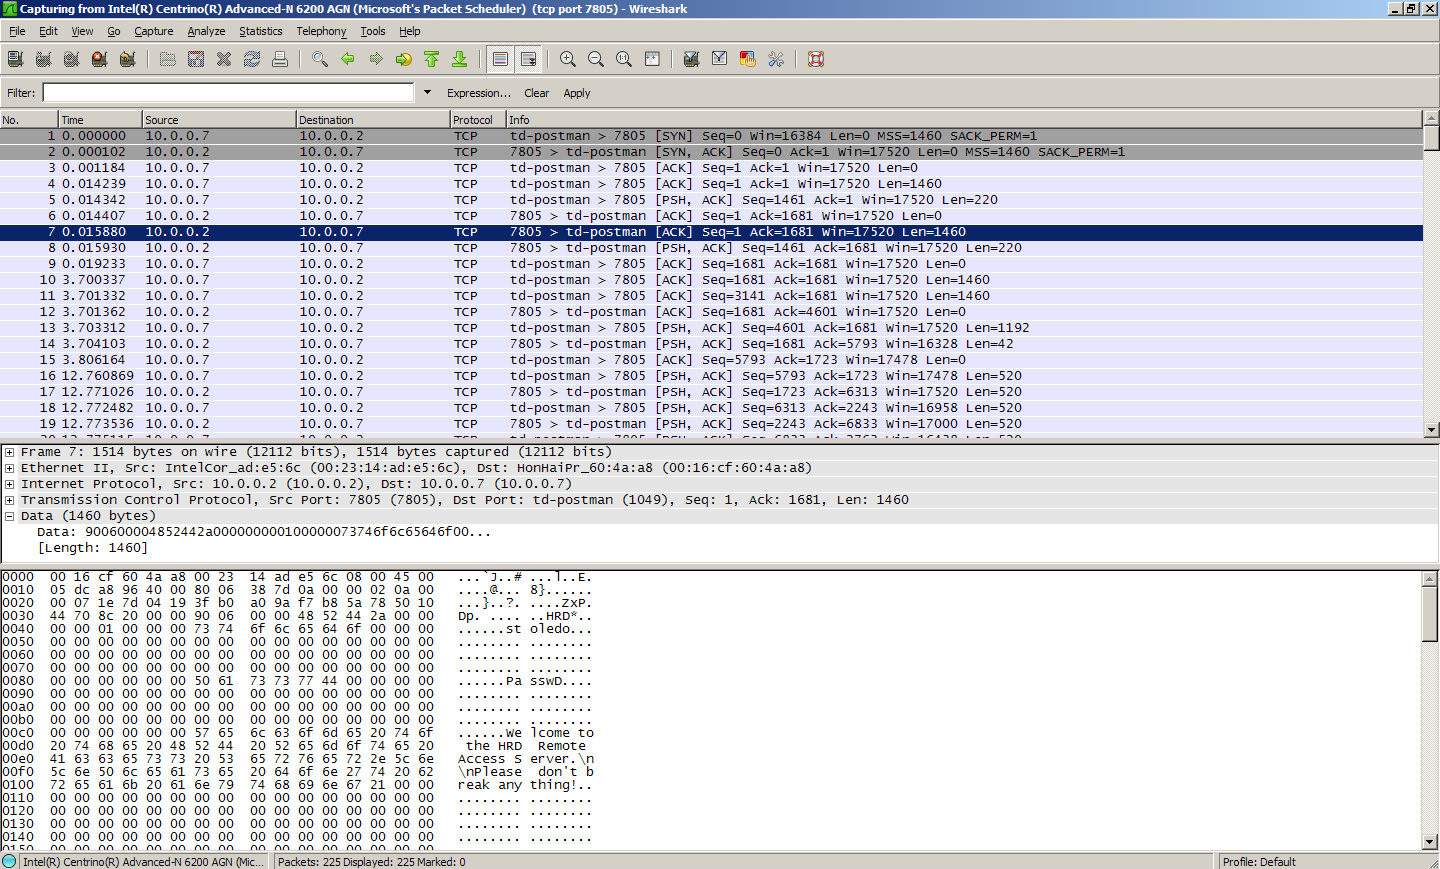 wireshark packet sniffing detection